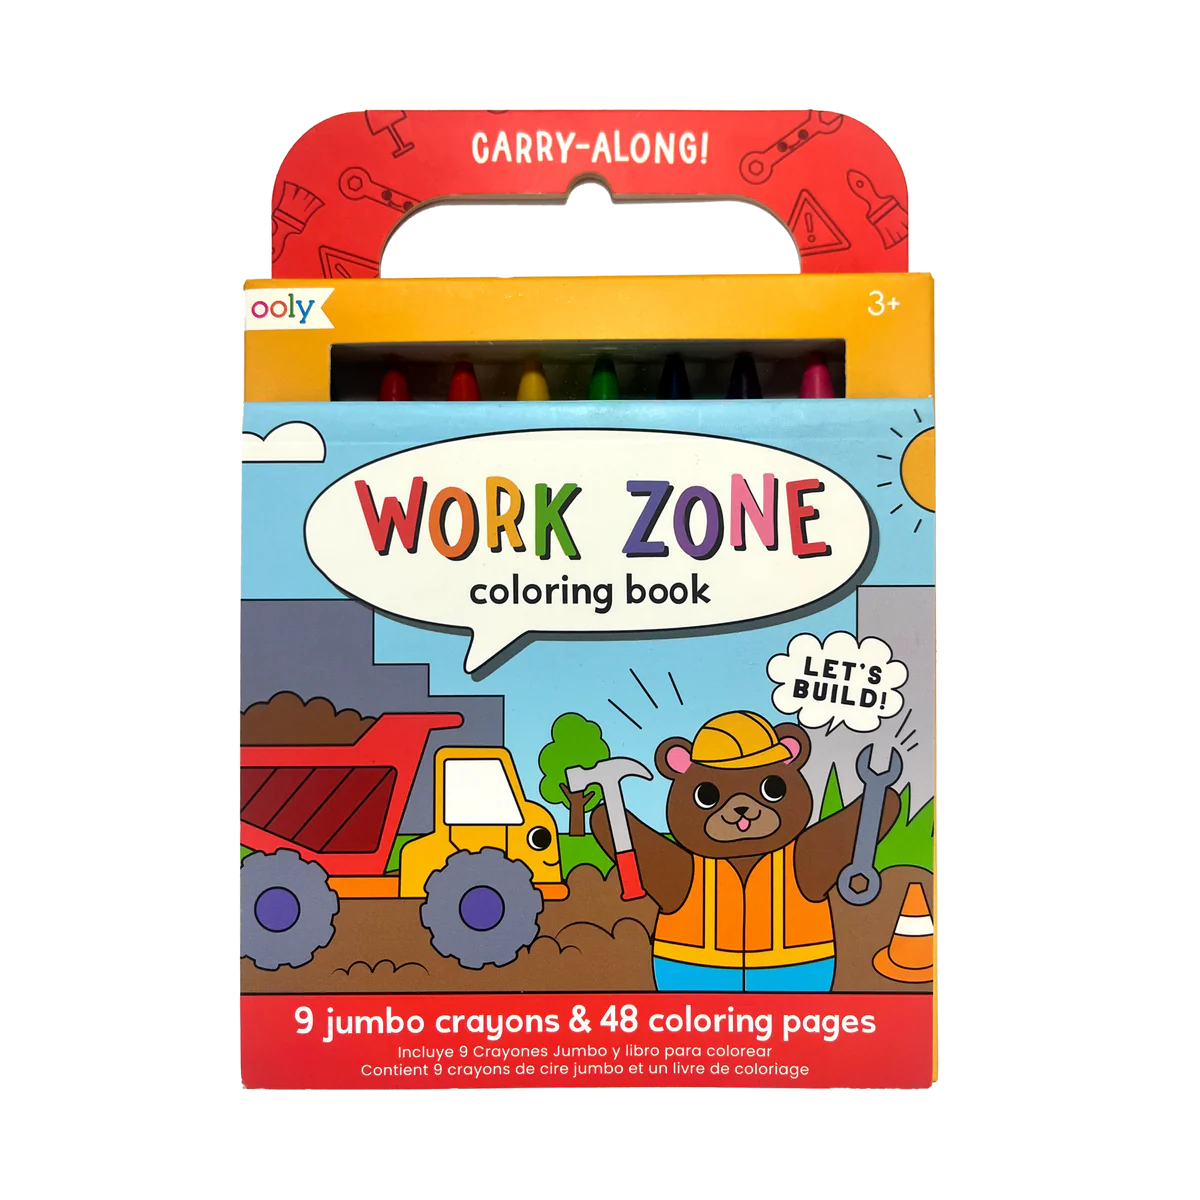 Ooly Carry Along Coloring Book Kit-- Work Zone